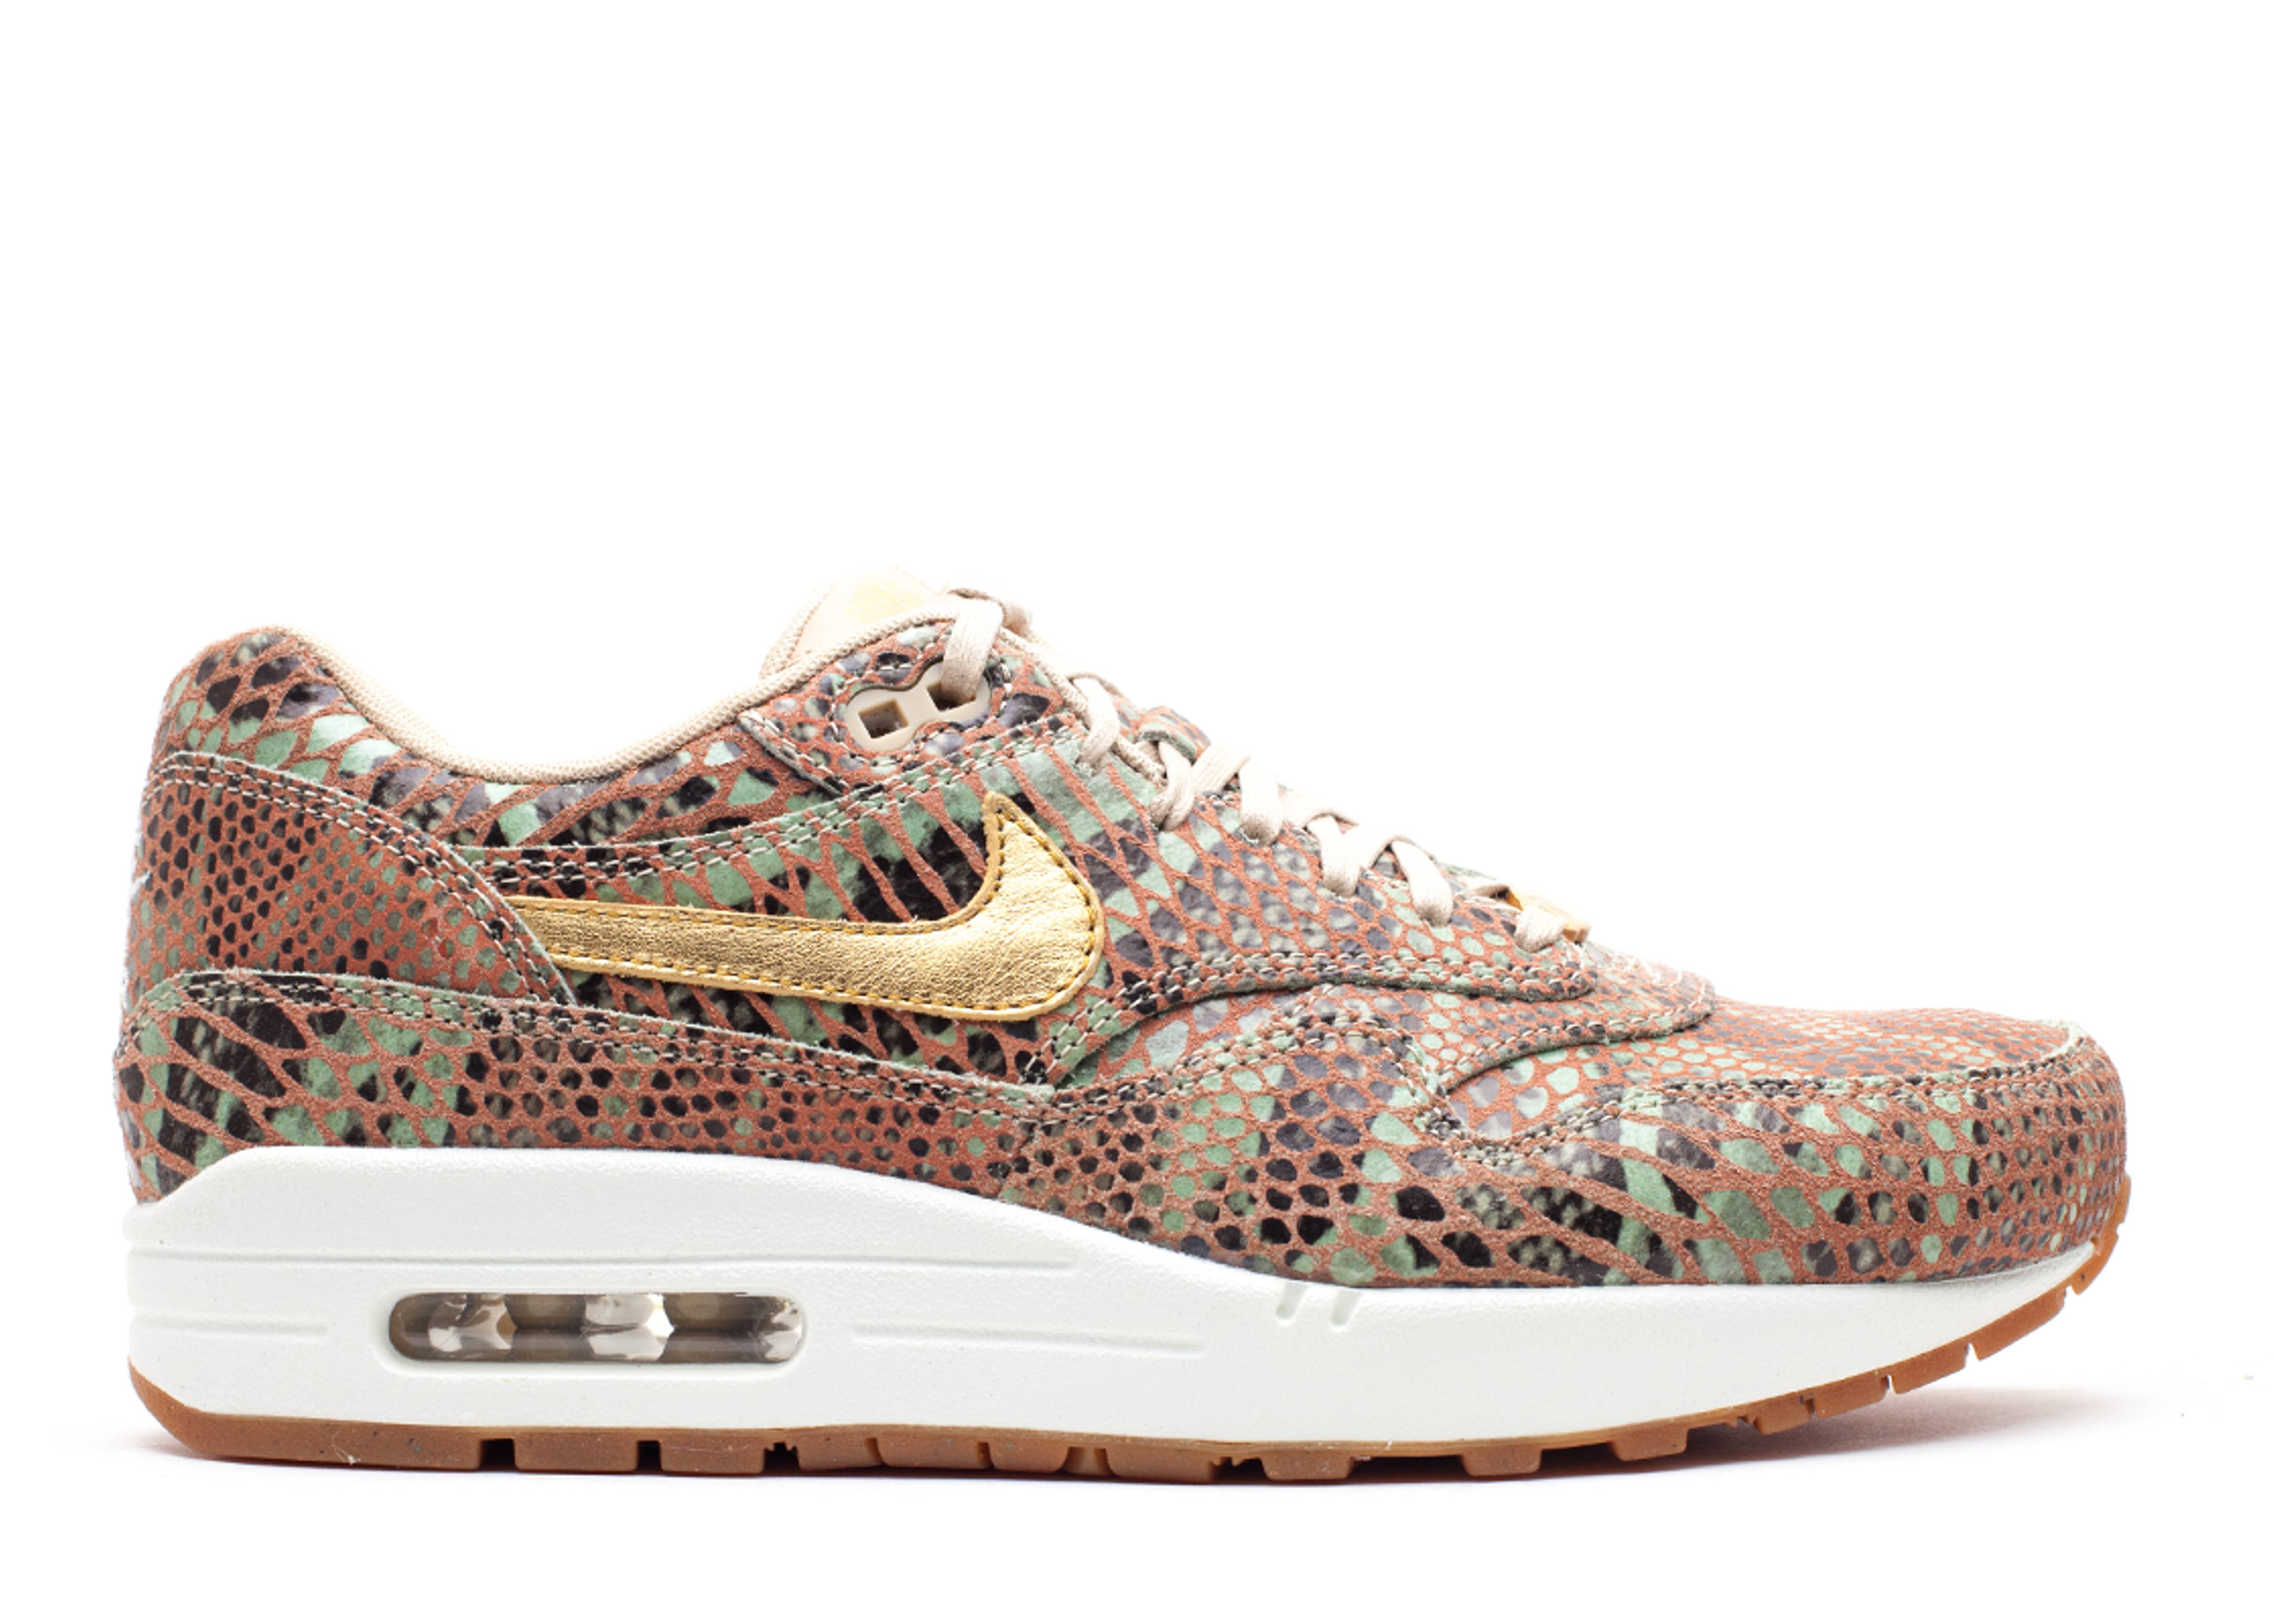 W'S Air Max 1 Yots Qs 'Year Of The Snake'